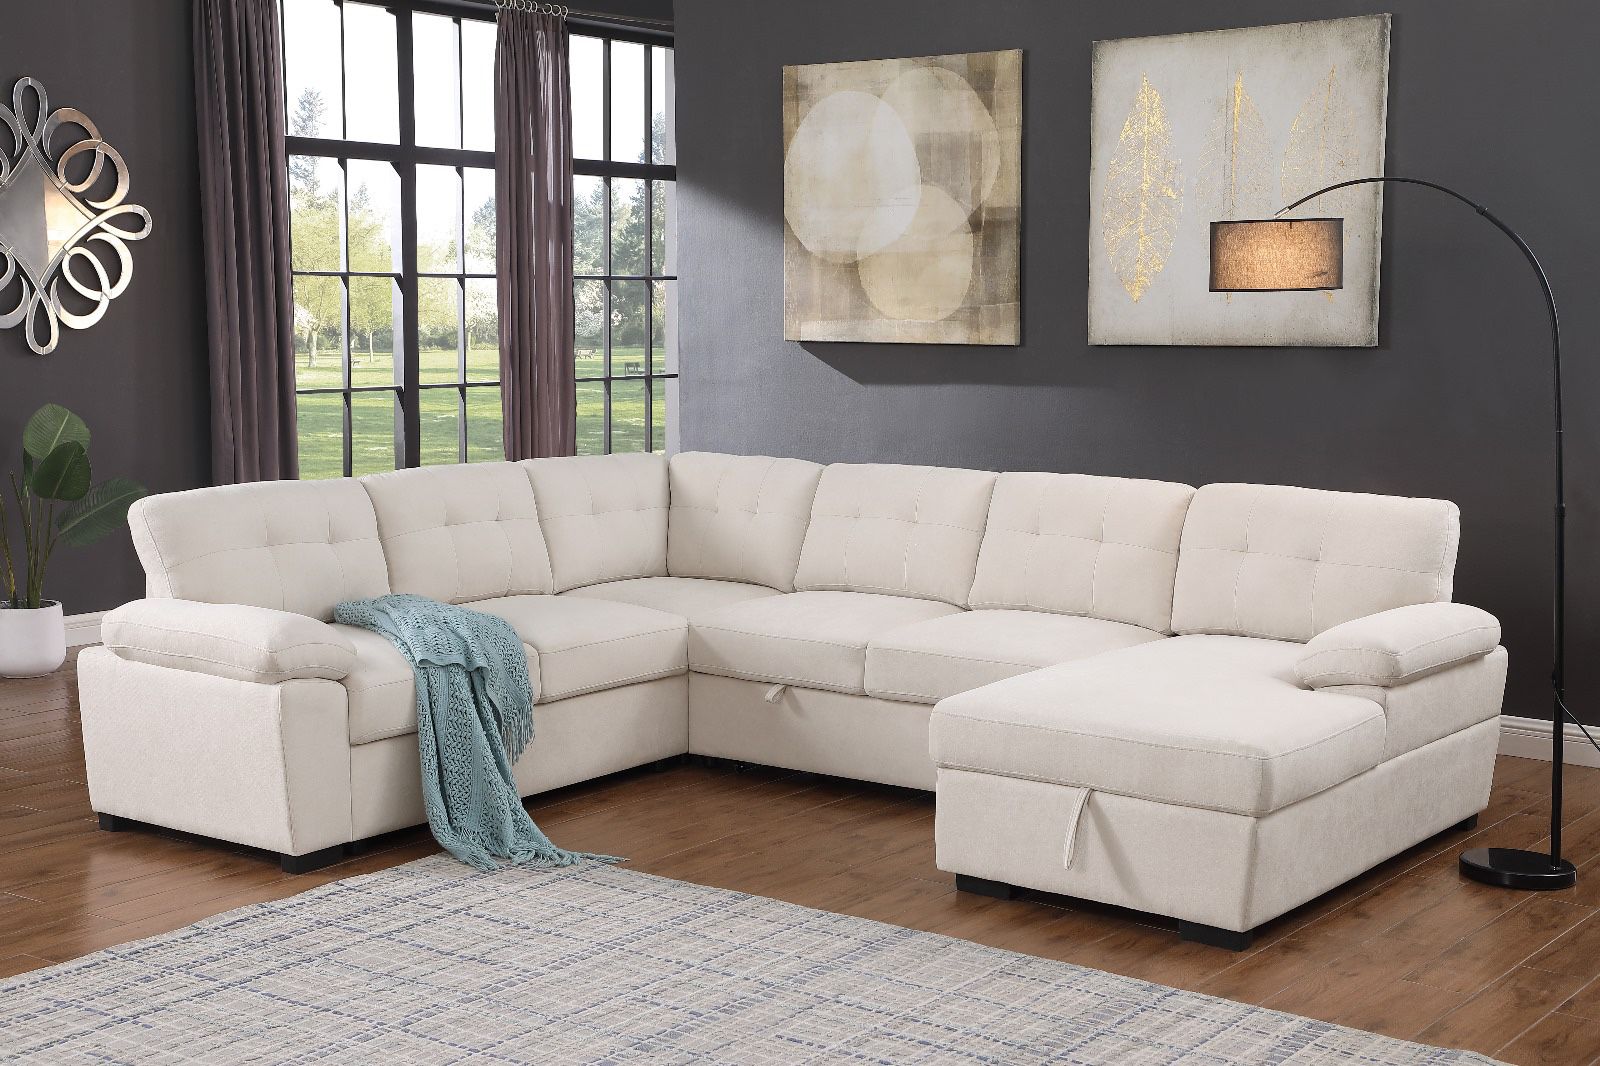 Hot Deal! Premium Sectional Sofa With Comfortable Cushions! Sectional Sofa, Sofa Bed, Sectional Sofa Bed, Sectional Couch, Sectionals 